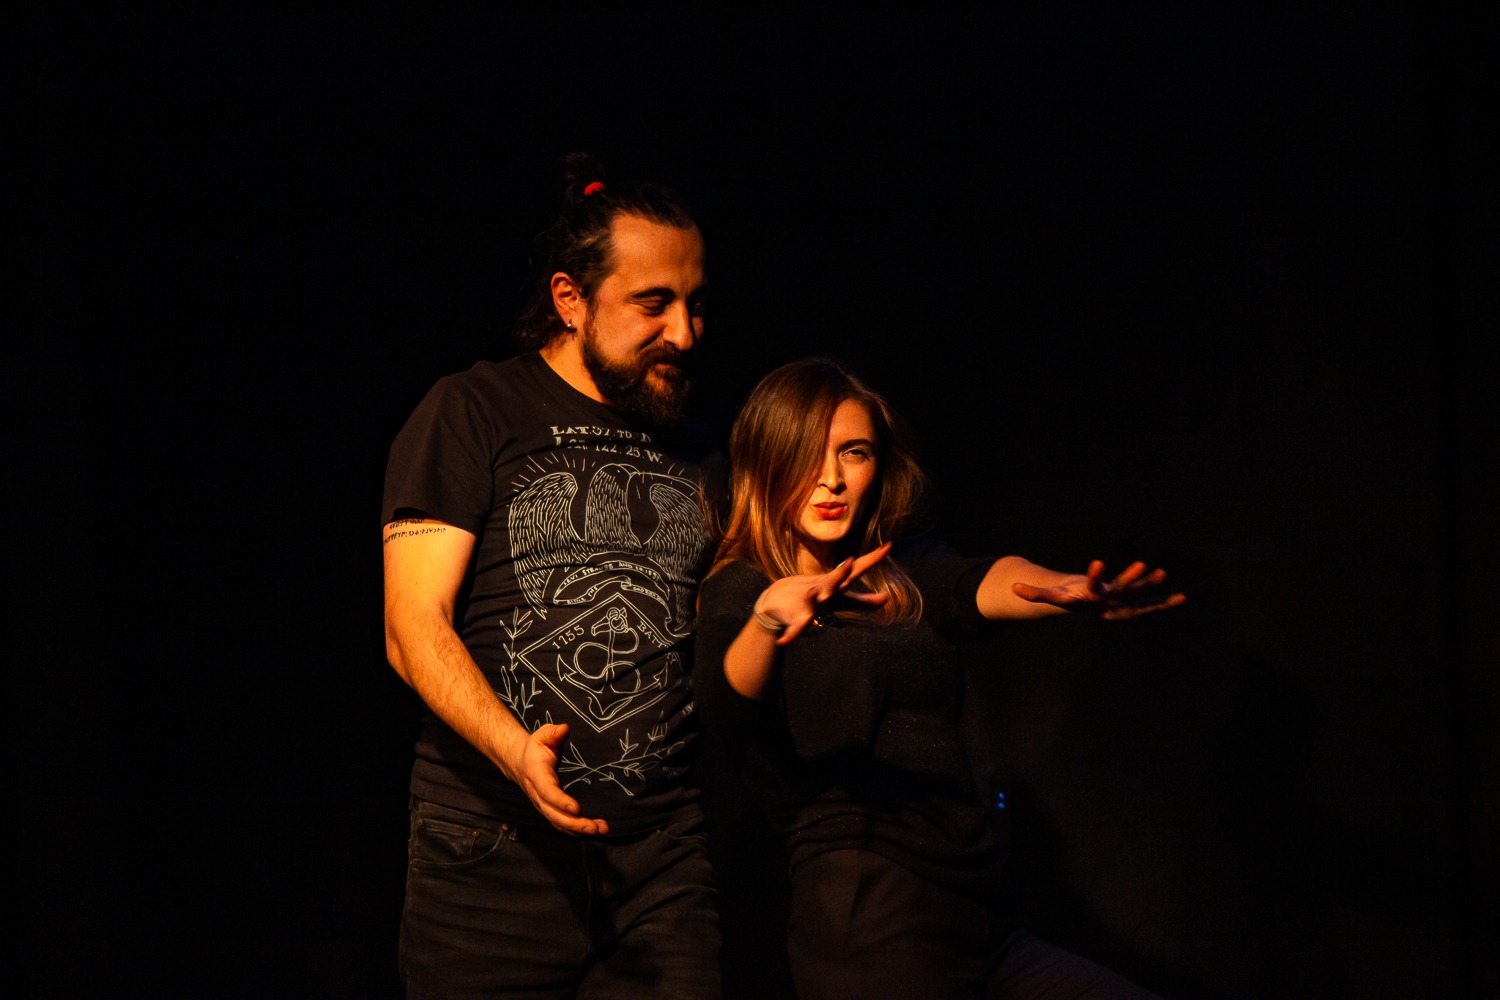 Act Attack's improv and physical show. A man and a woman on stage wearing black. The woman is posing or reaching her arms to show something, the man looks at her grinning